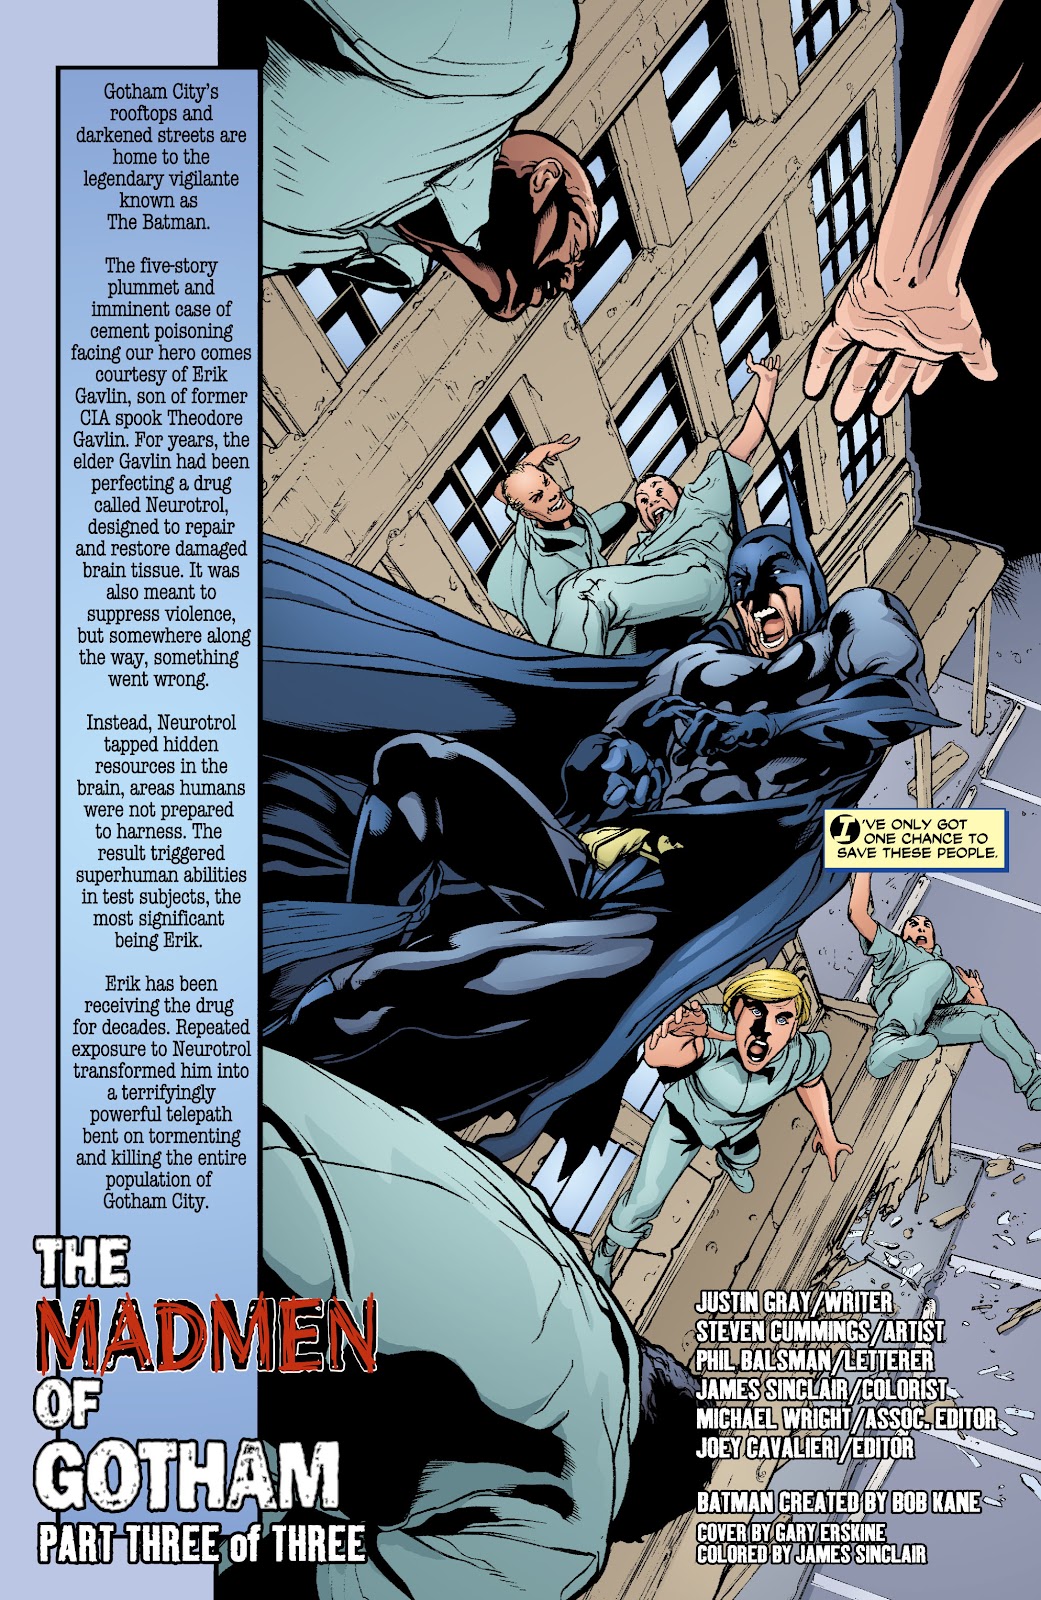 Batman: Legends of the Dark Knight issue 206 - Page 2